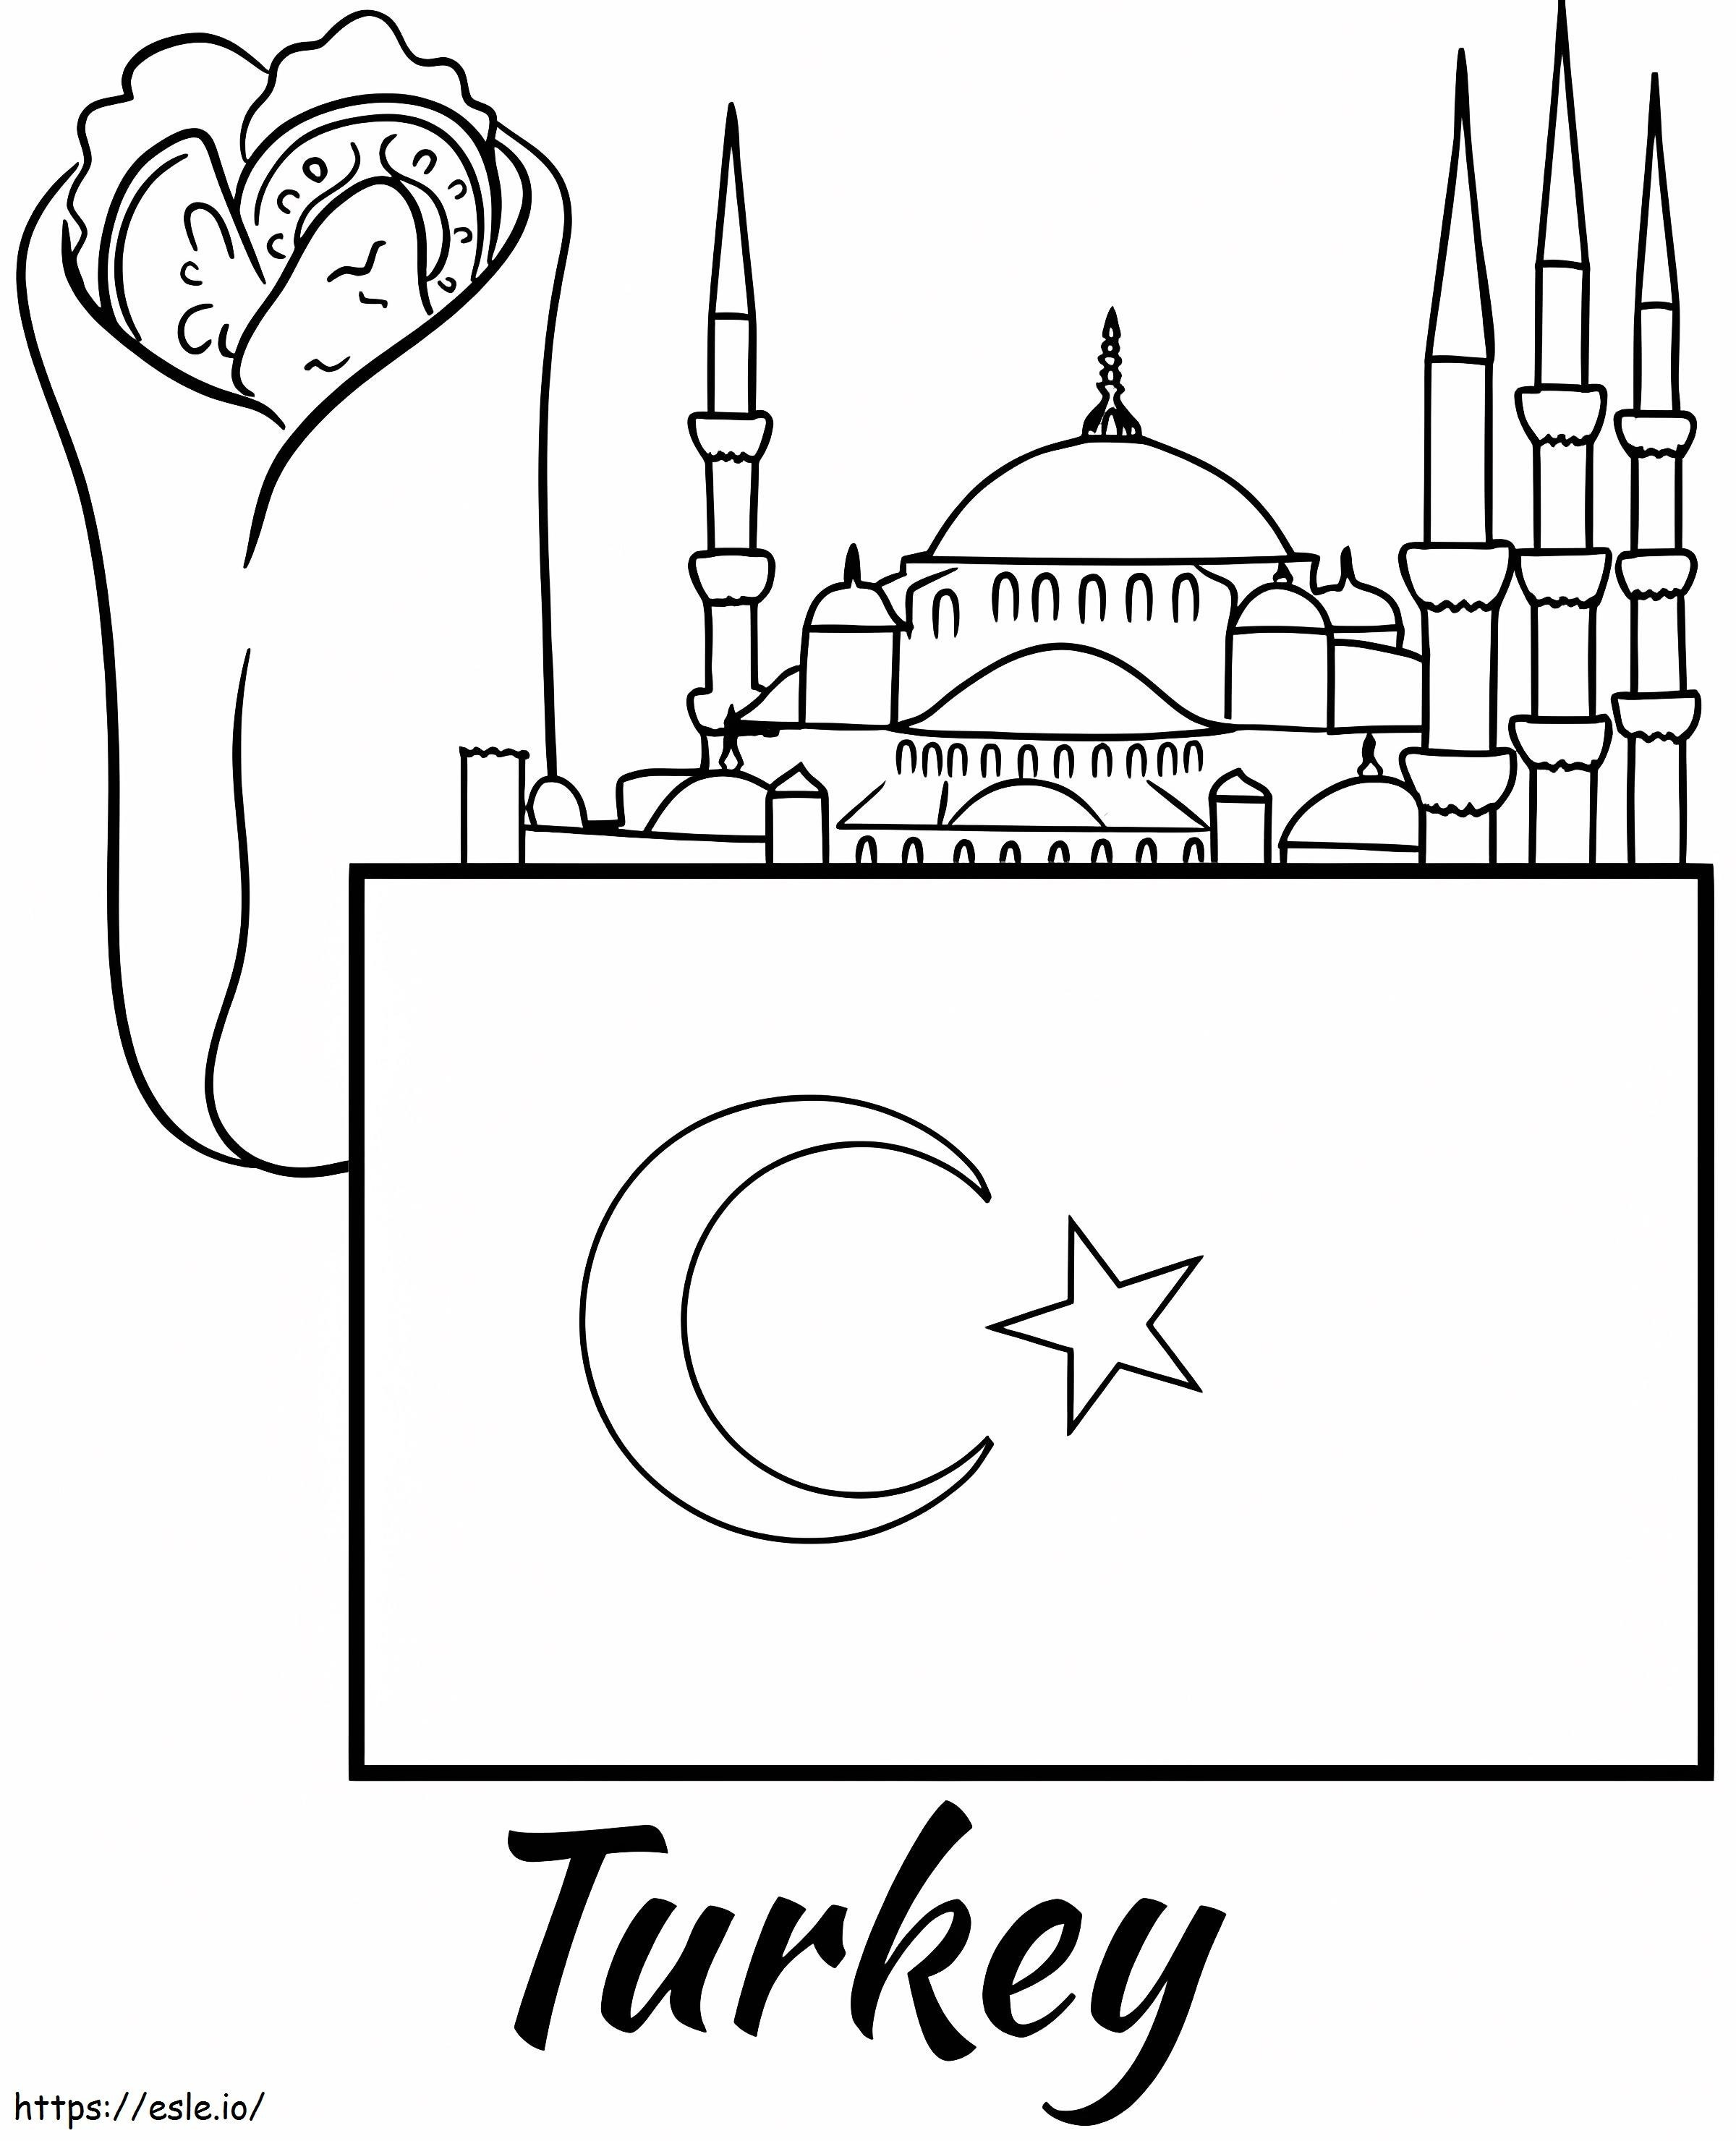 Country Turkey coloring page